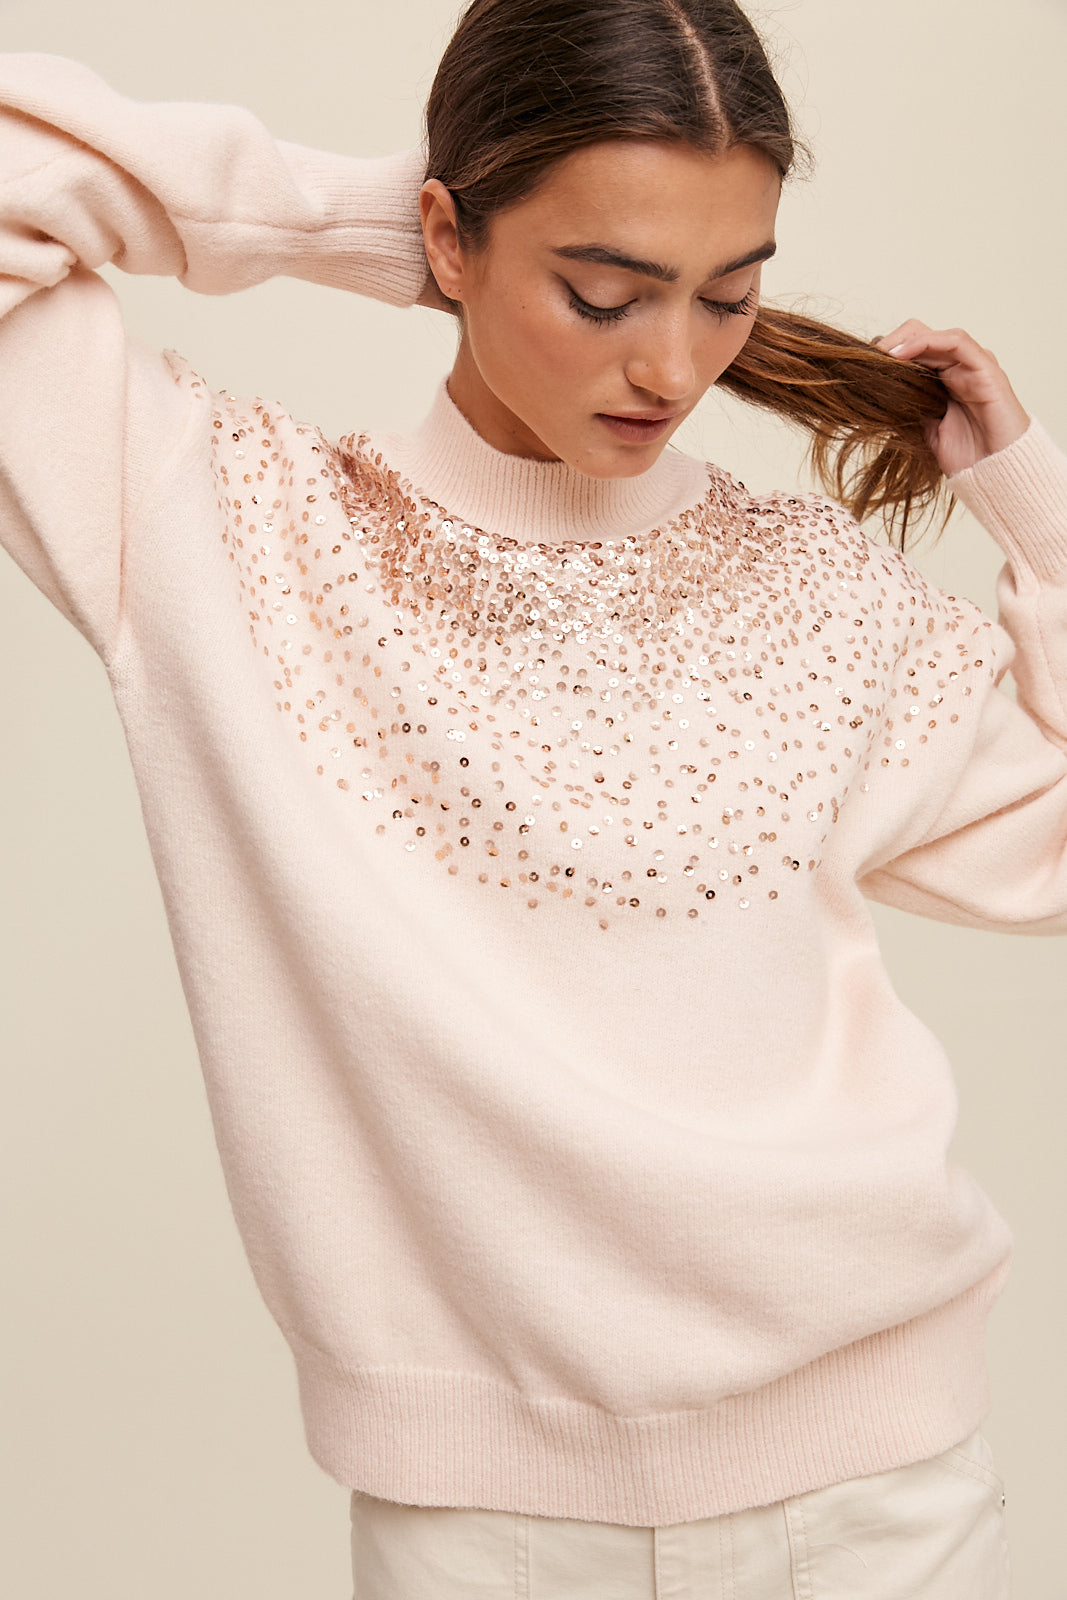 Sprinkled Sequin Sweater - Blush-Sweater- Hometown Style HTS, women's in store and online boutique located in Ingersoll, Ontario